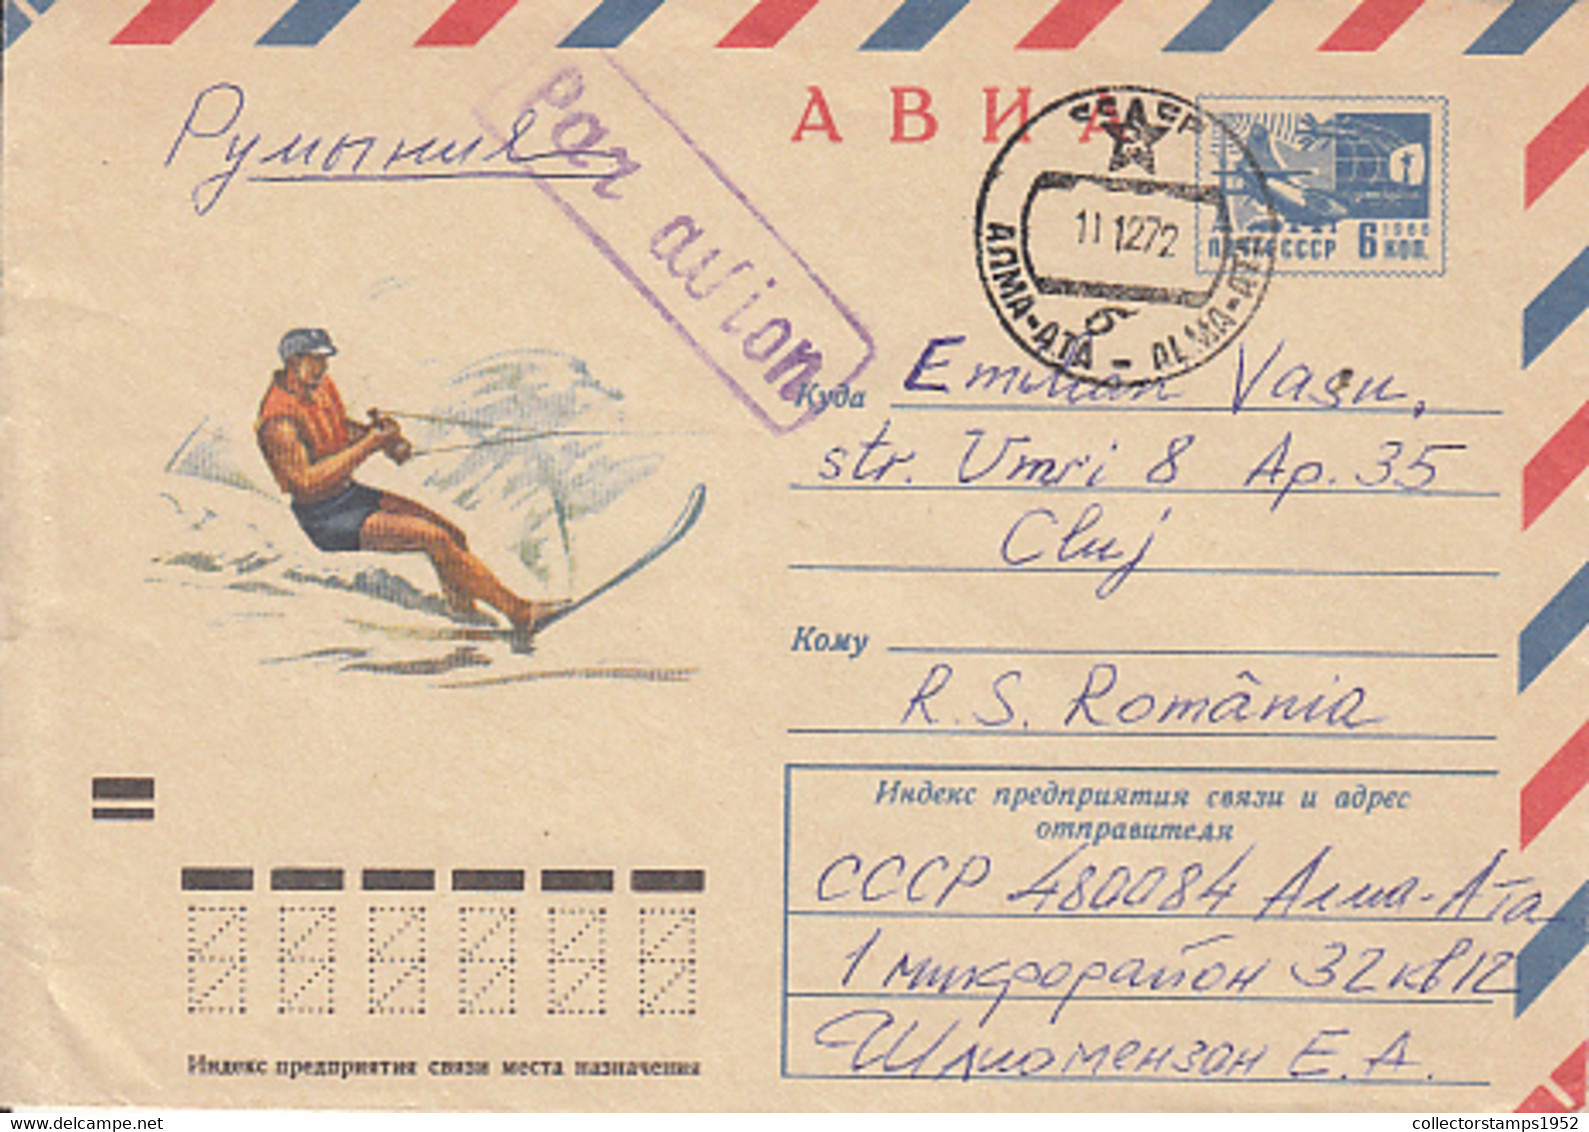 93284- WATER SKIING, SPORTS, COVER STATIONERY, 1972, RUSSIA-USSR - Sci Nautico